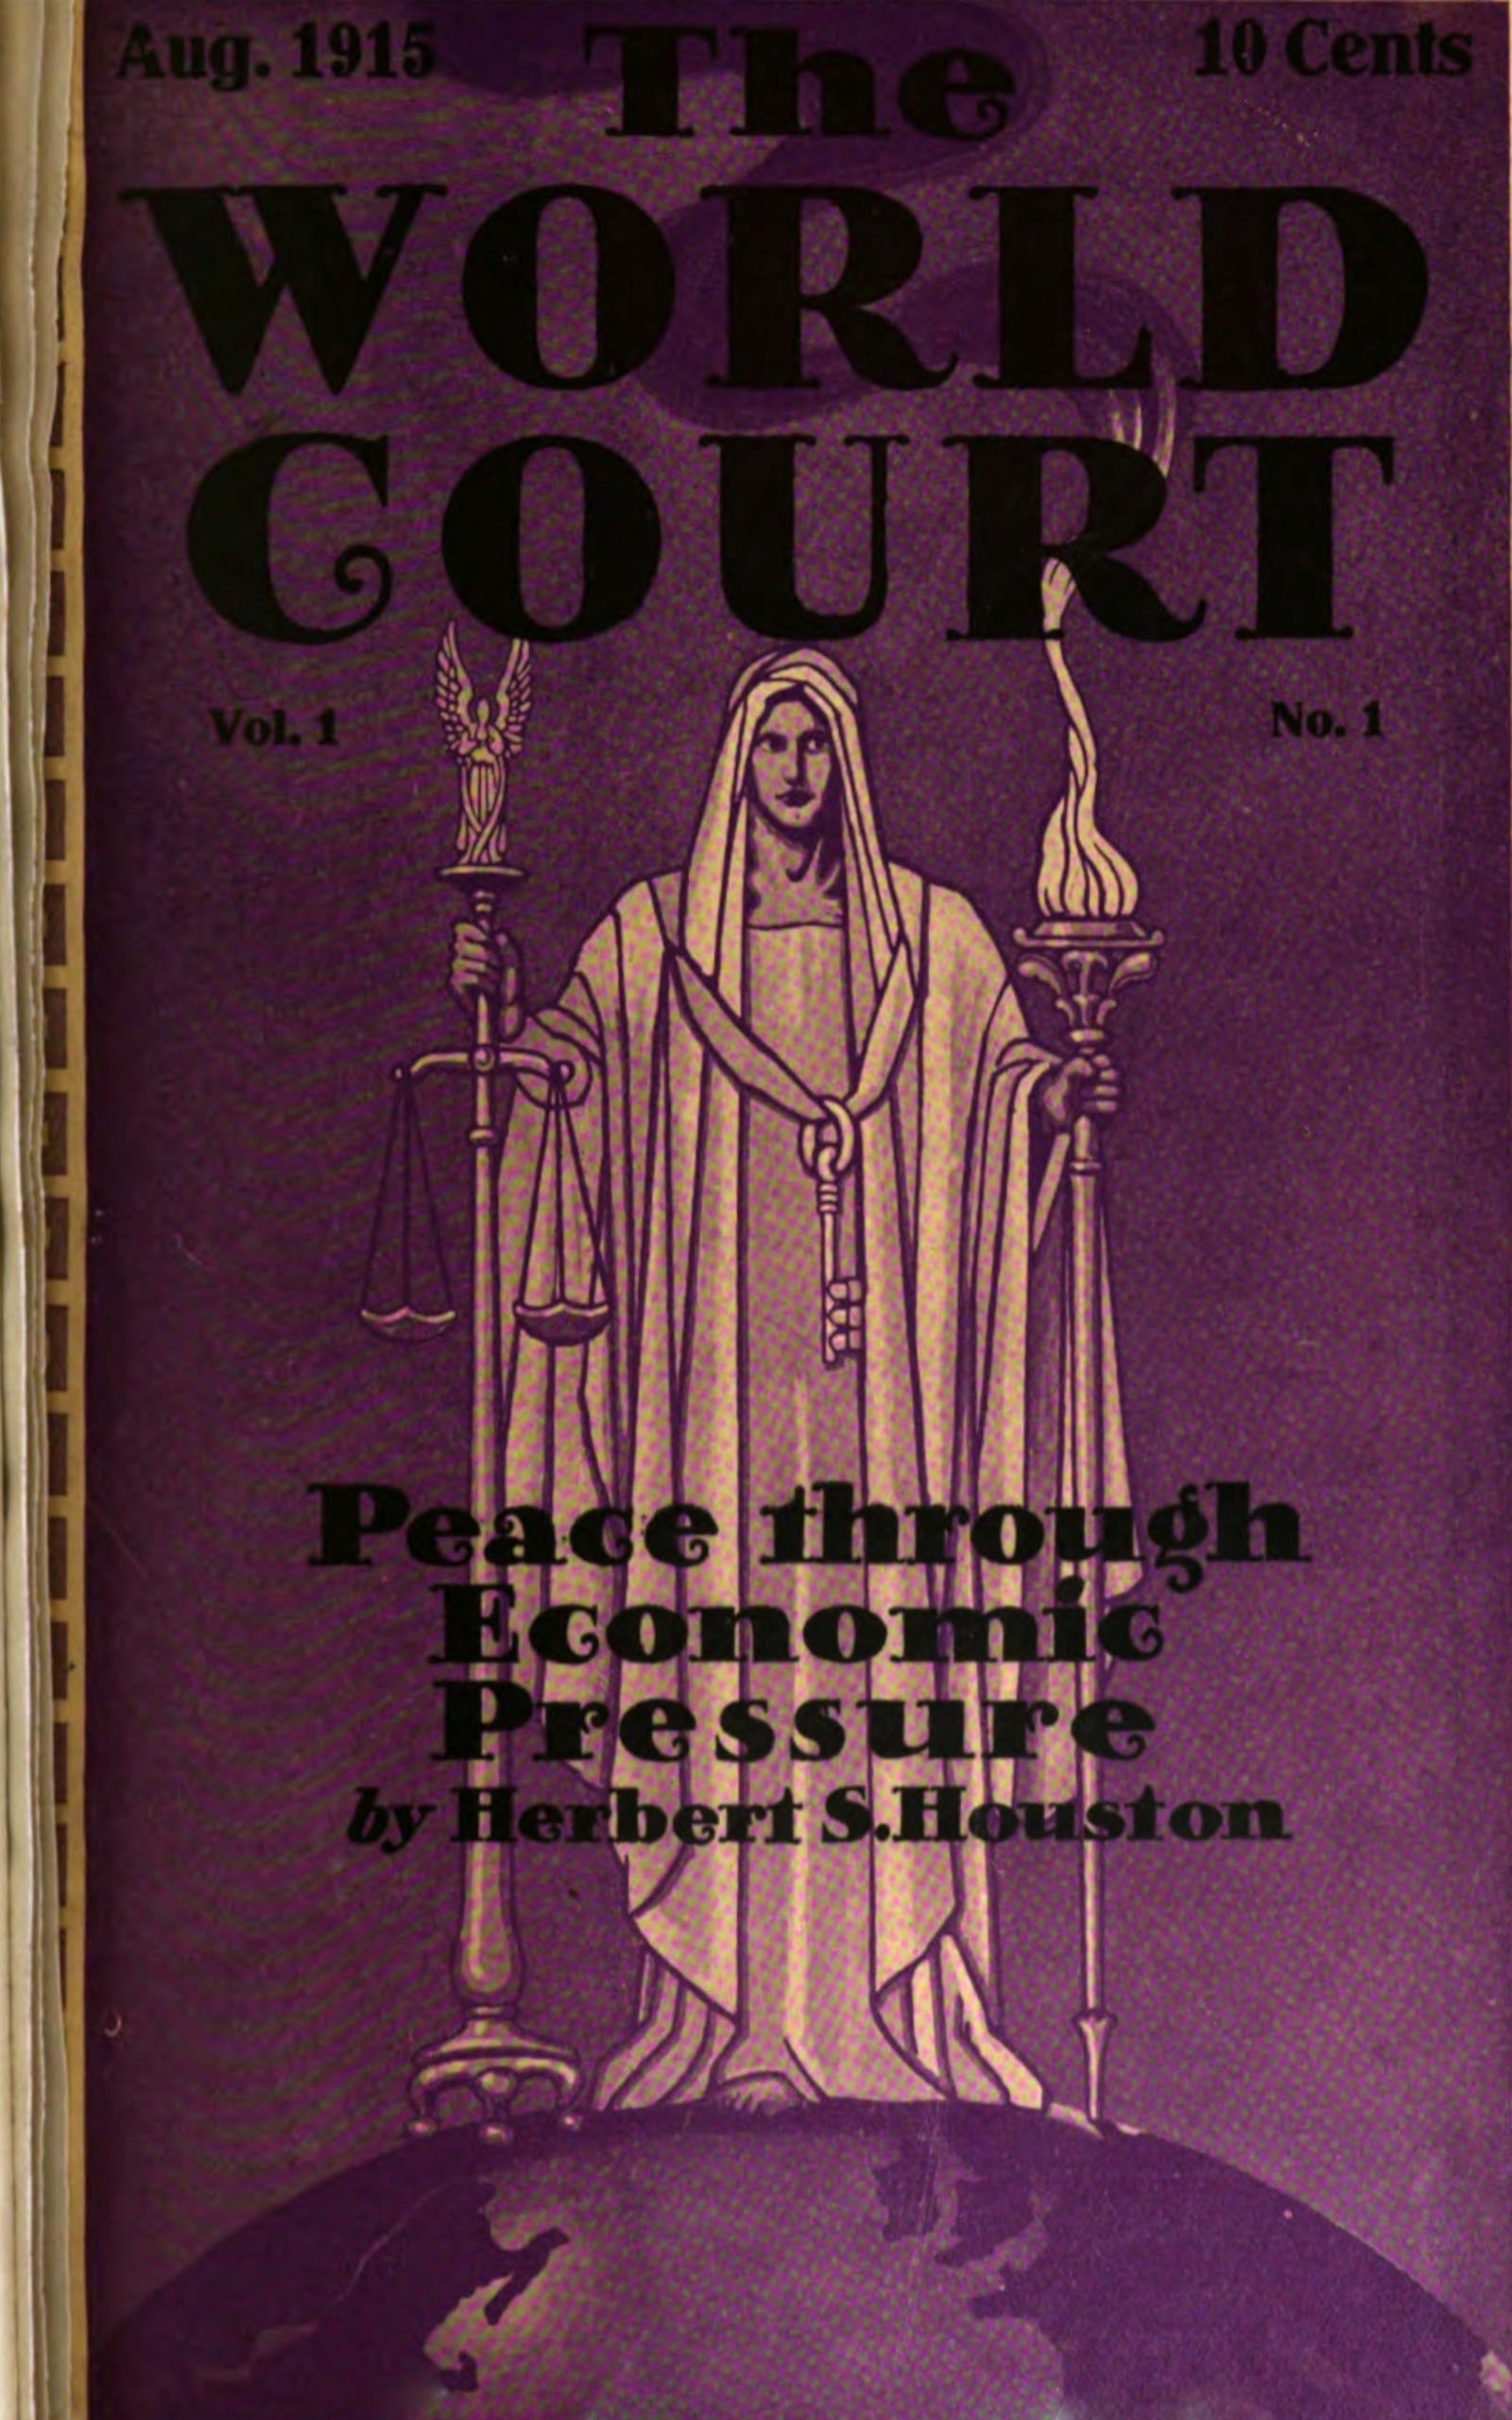 Aug. 1915 10 Cents THE WORLD COURT Vol. I No. 1 Peace through Economic Pressure by Herbert S. Houston